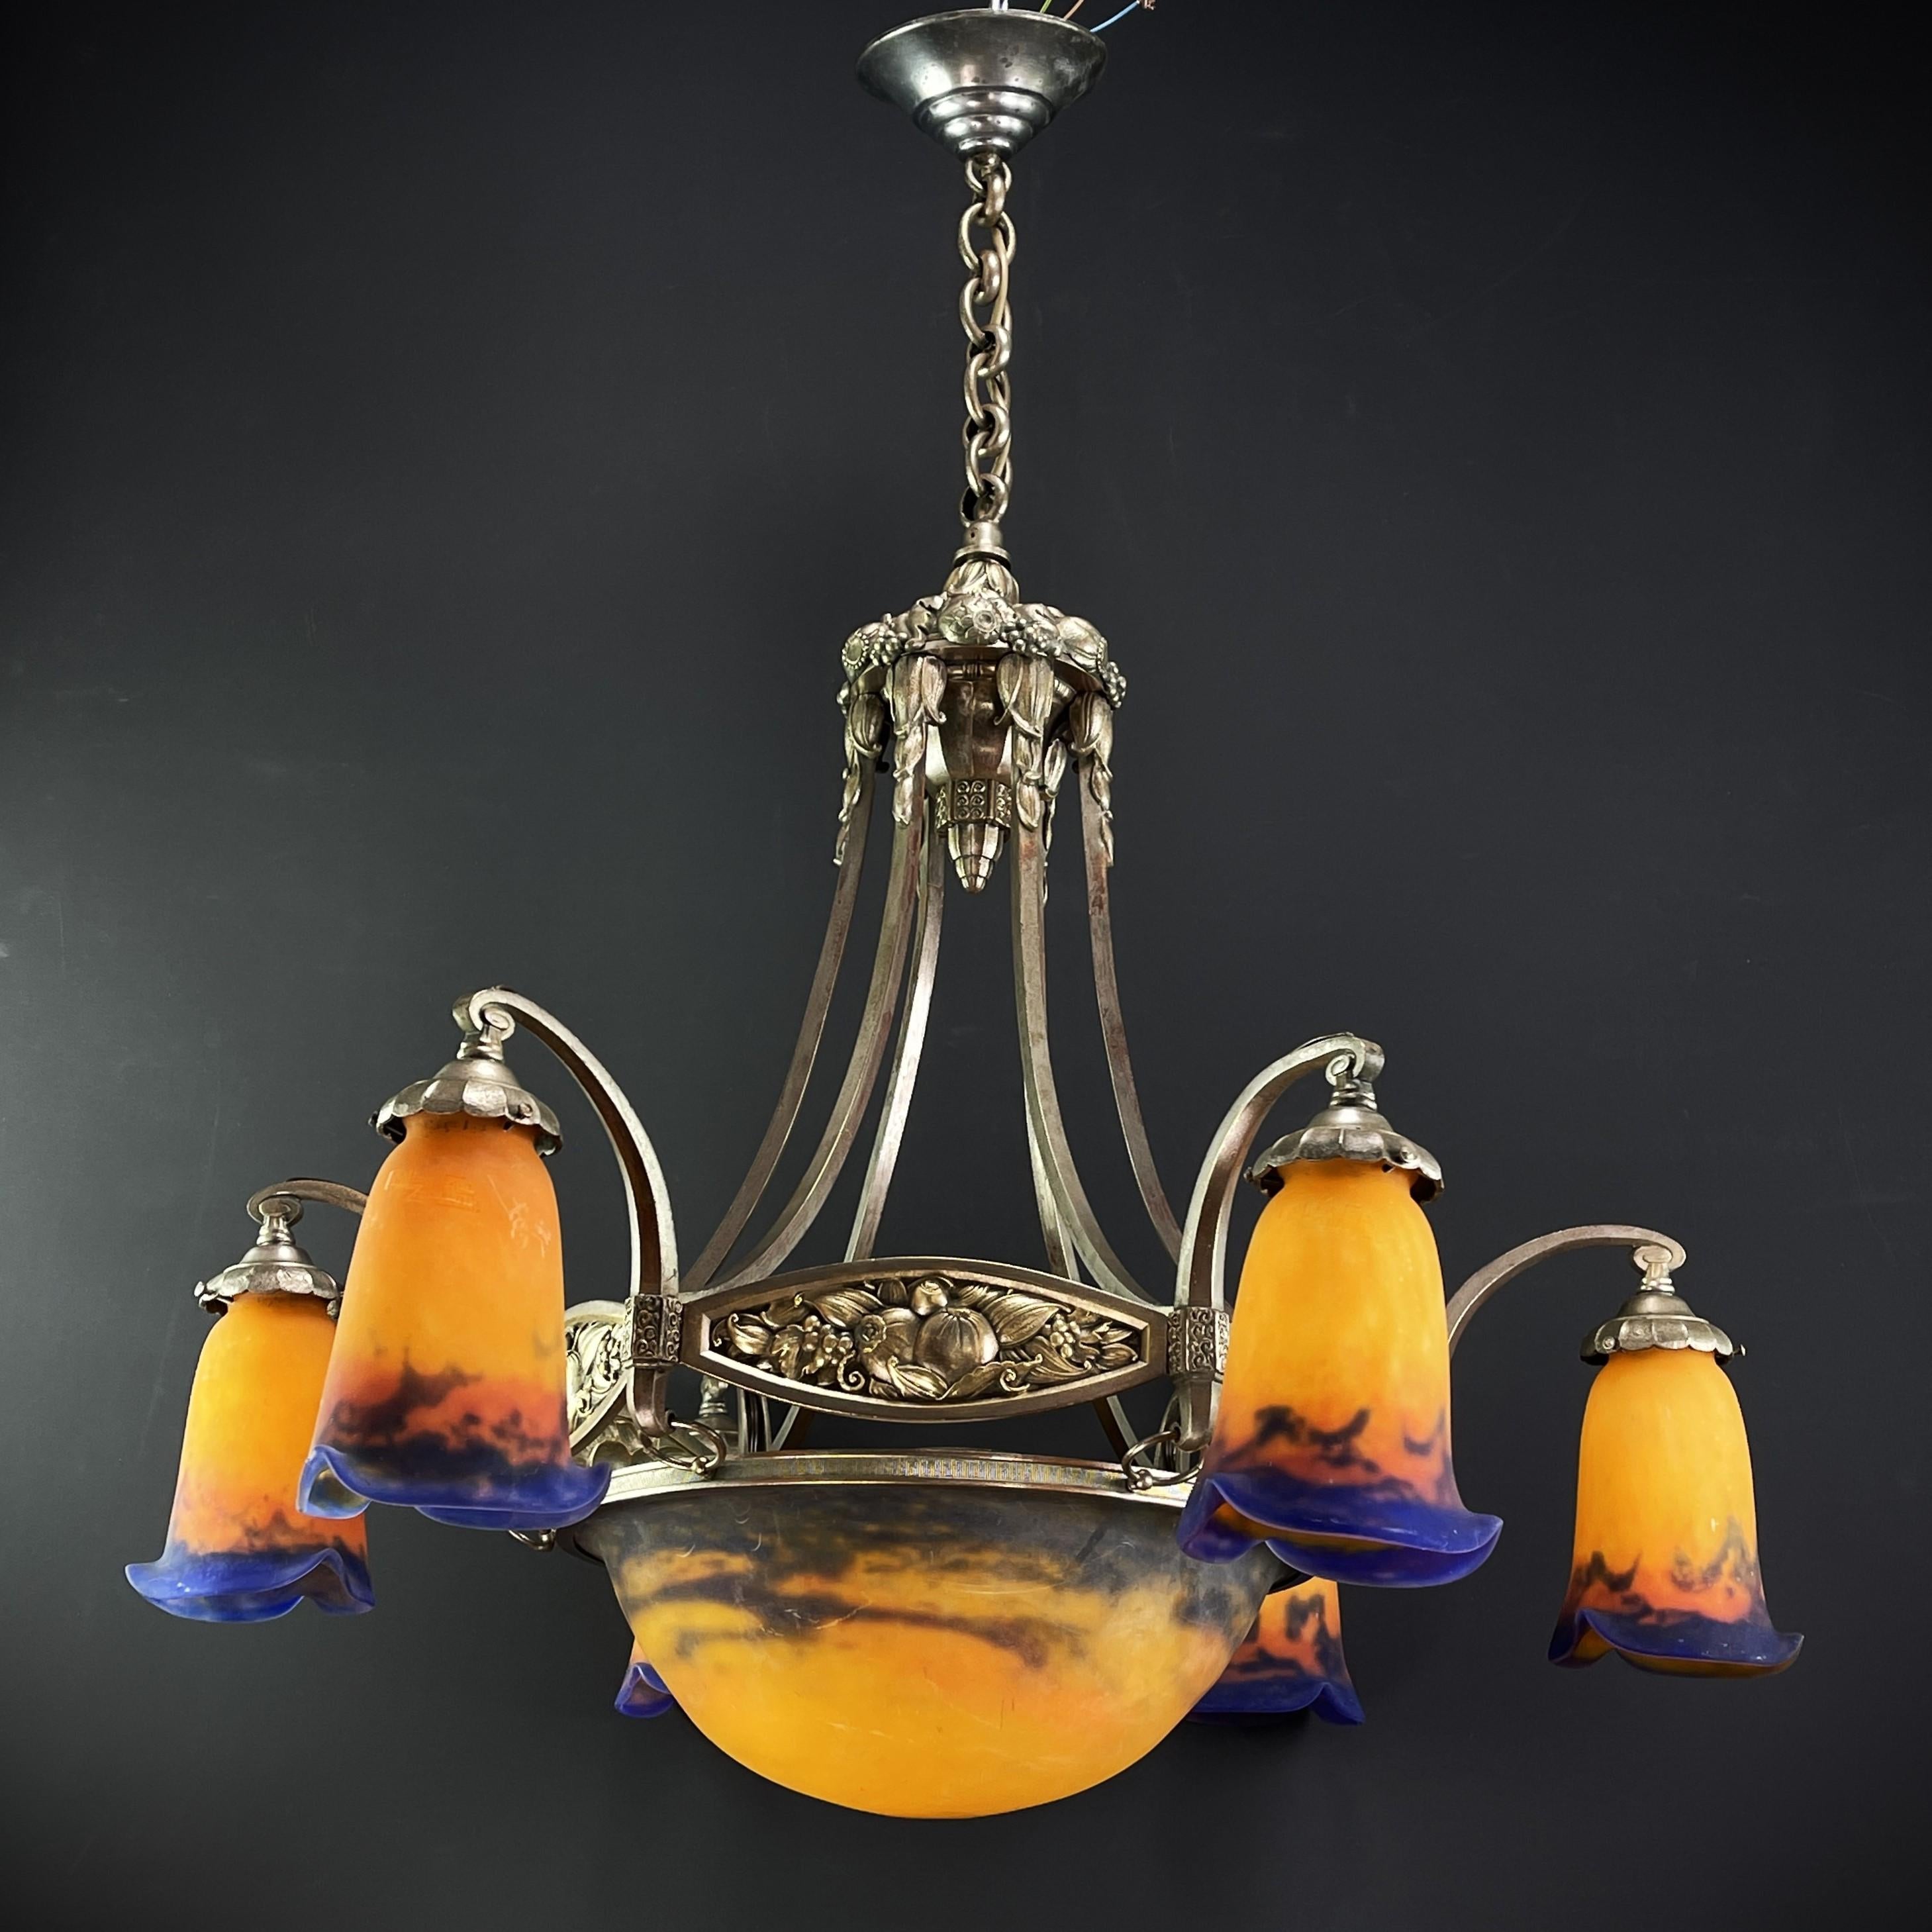 Art-Déco-Kronleuchter by Muller Freres Luneville

The ART DECO ceiling lamp is a remarkable example of the craftsmanship and style of the early 20th century. 

The signature 